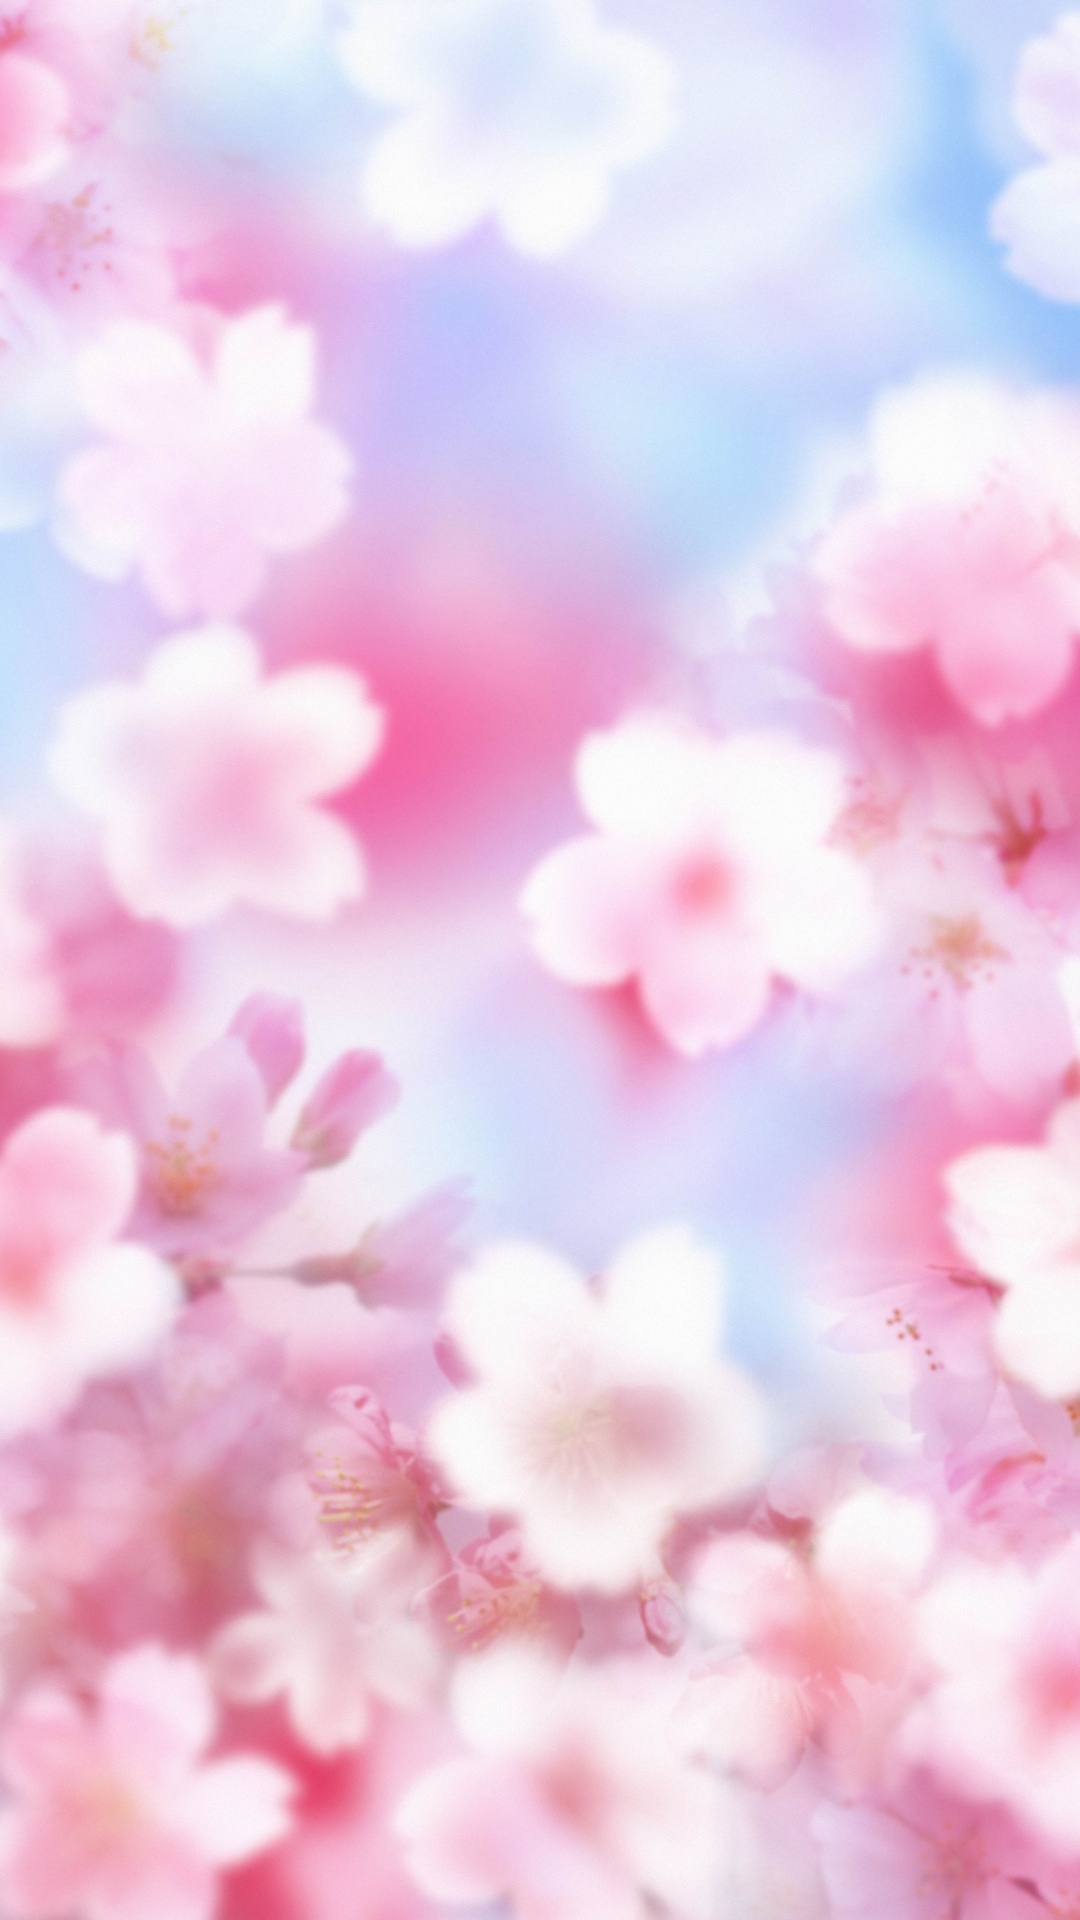 Pink Cherry Blossom Under Blue Sky During Daytime. Wallpaper in 1080x1920 Resolution